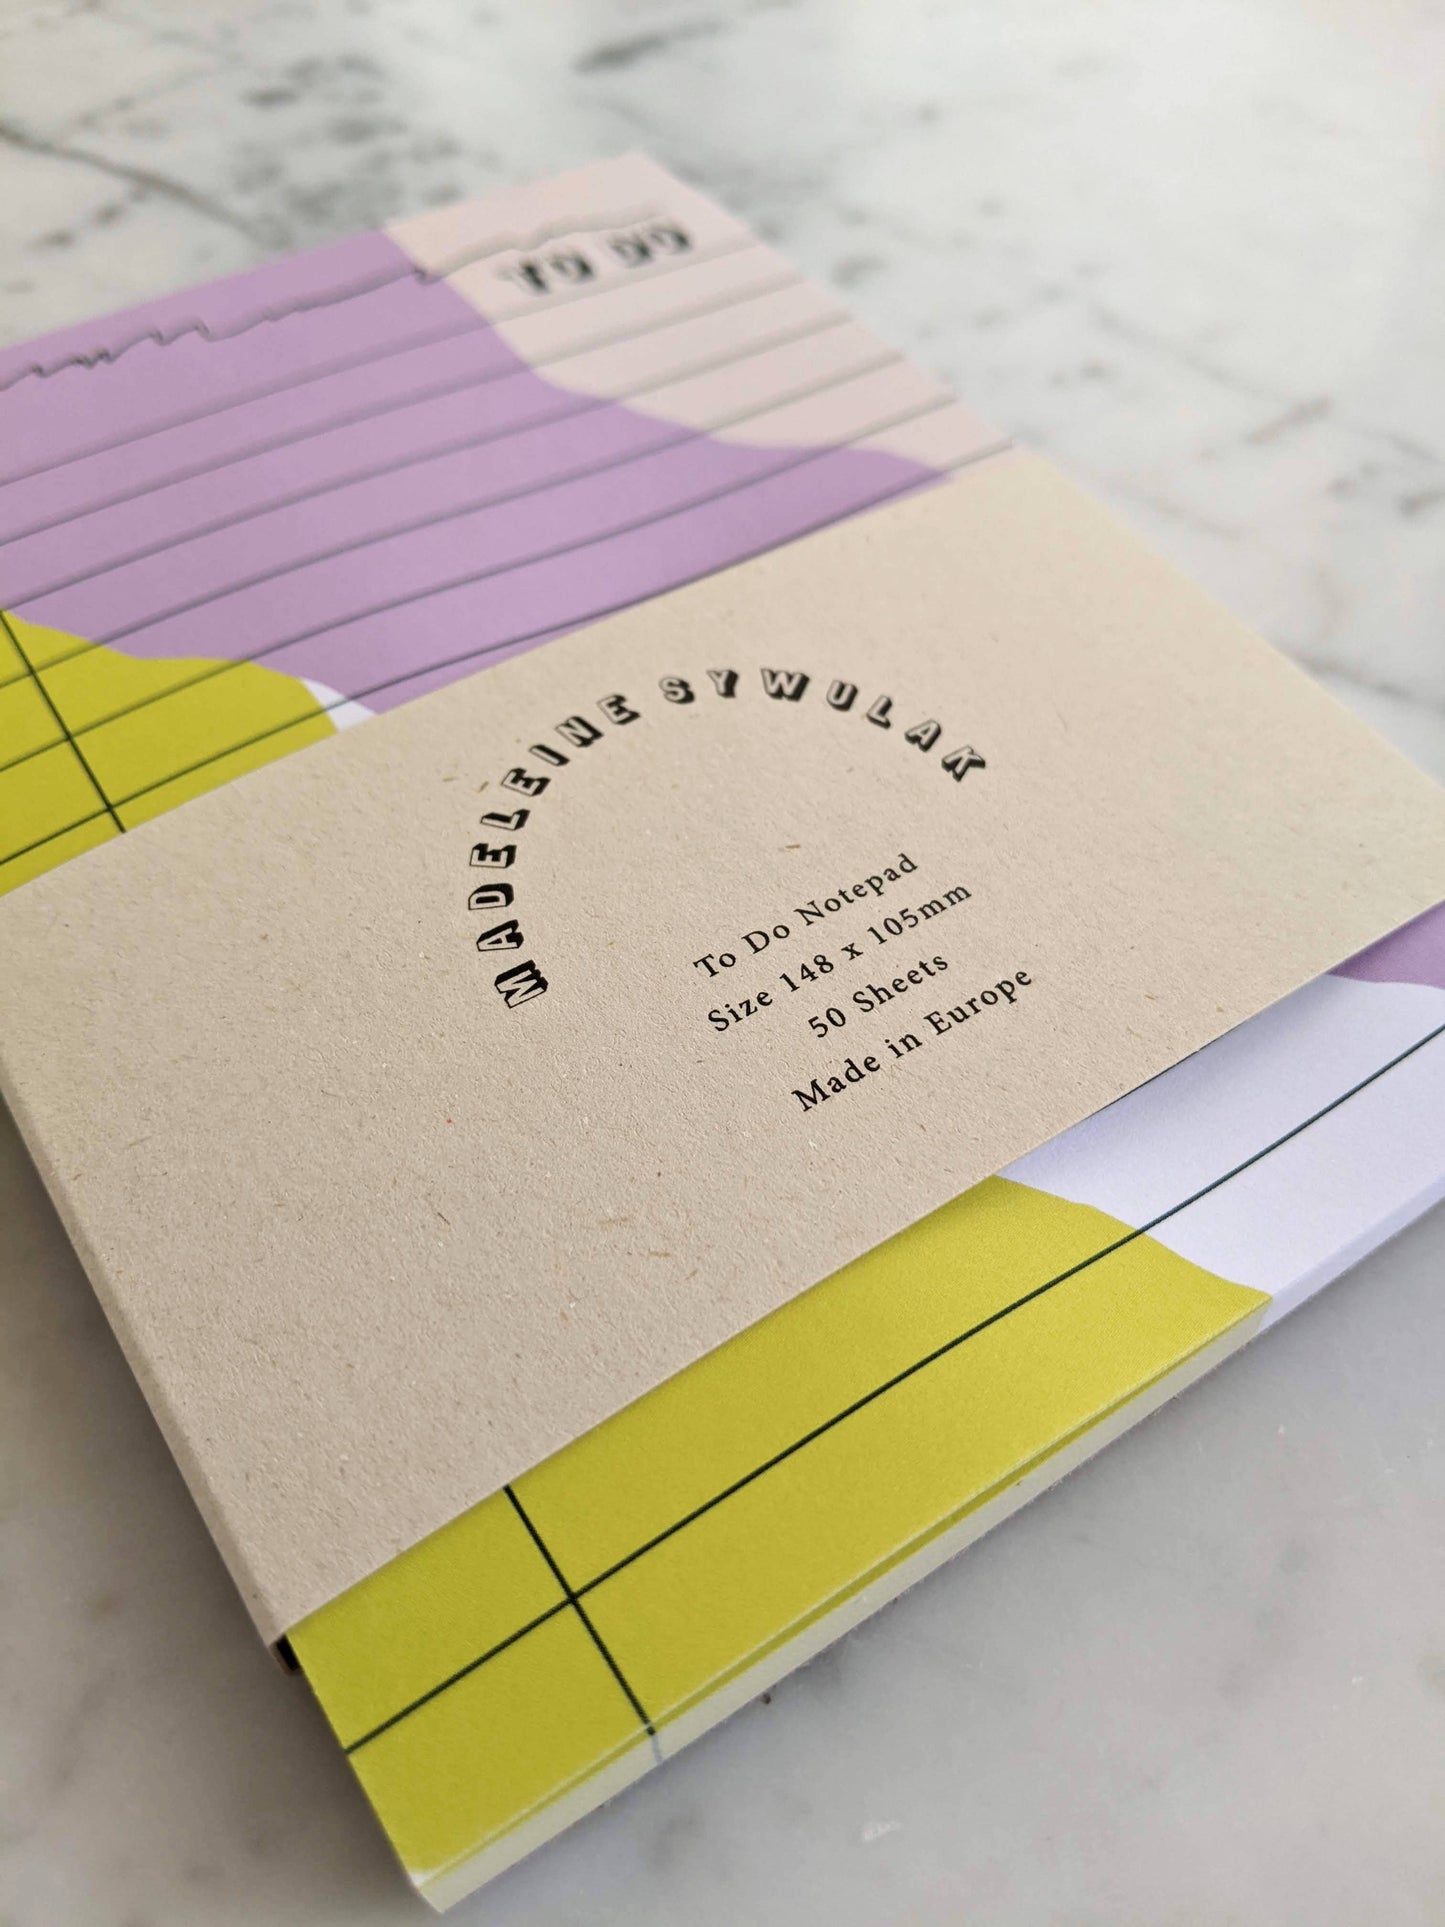 50 sheet to-do notepad in citron, lavender and dark green.